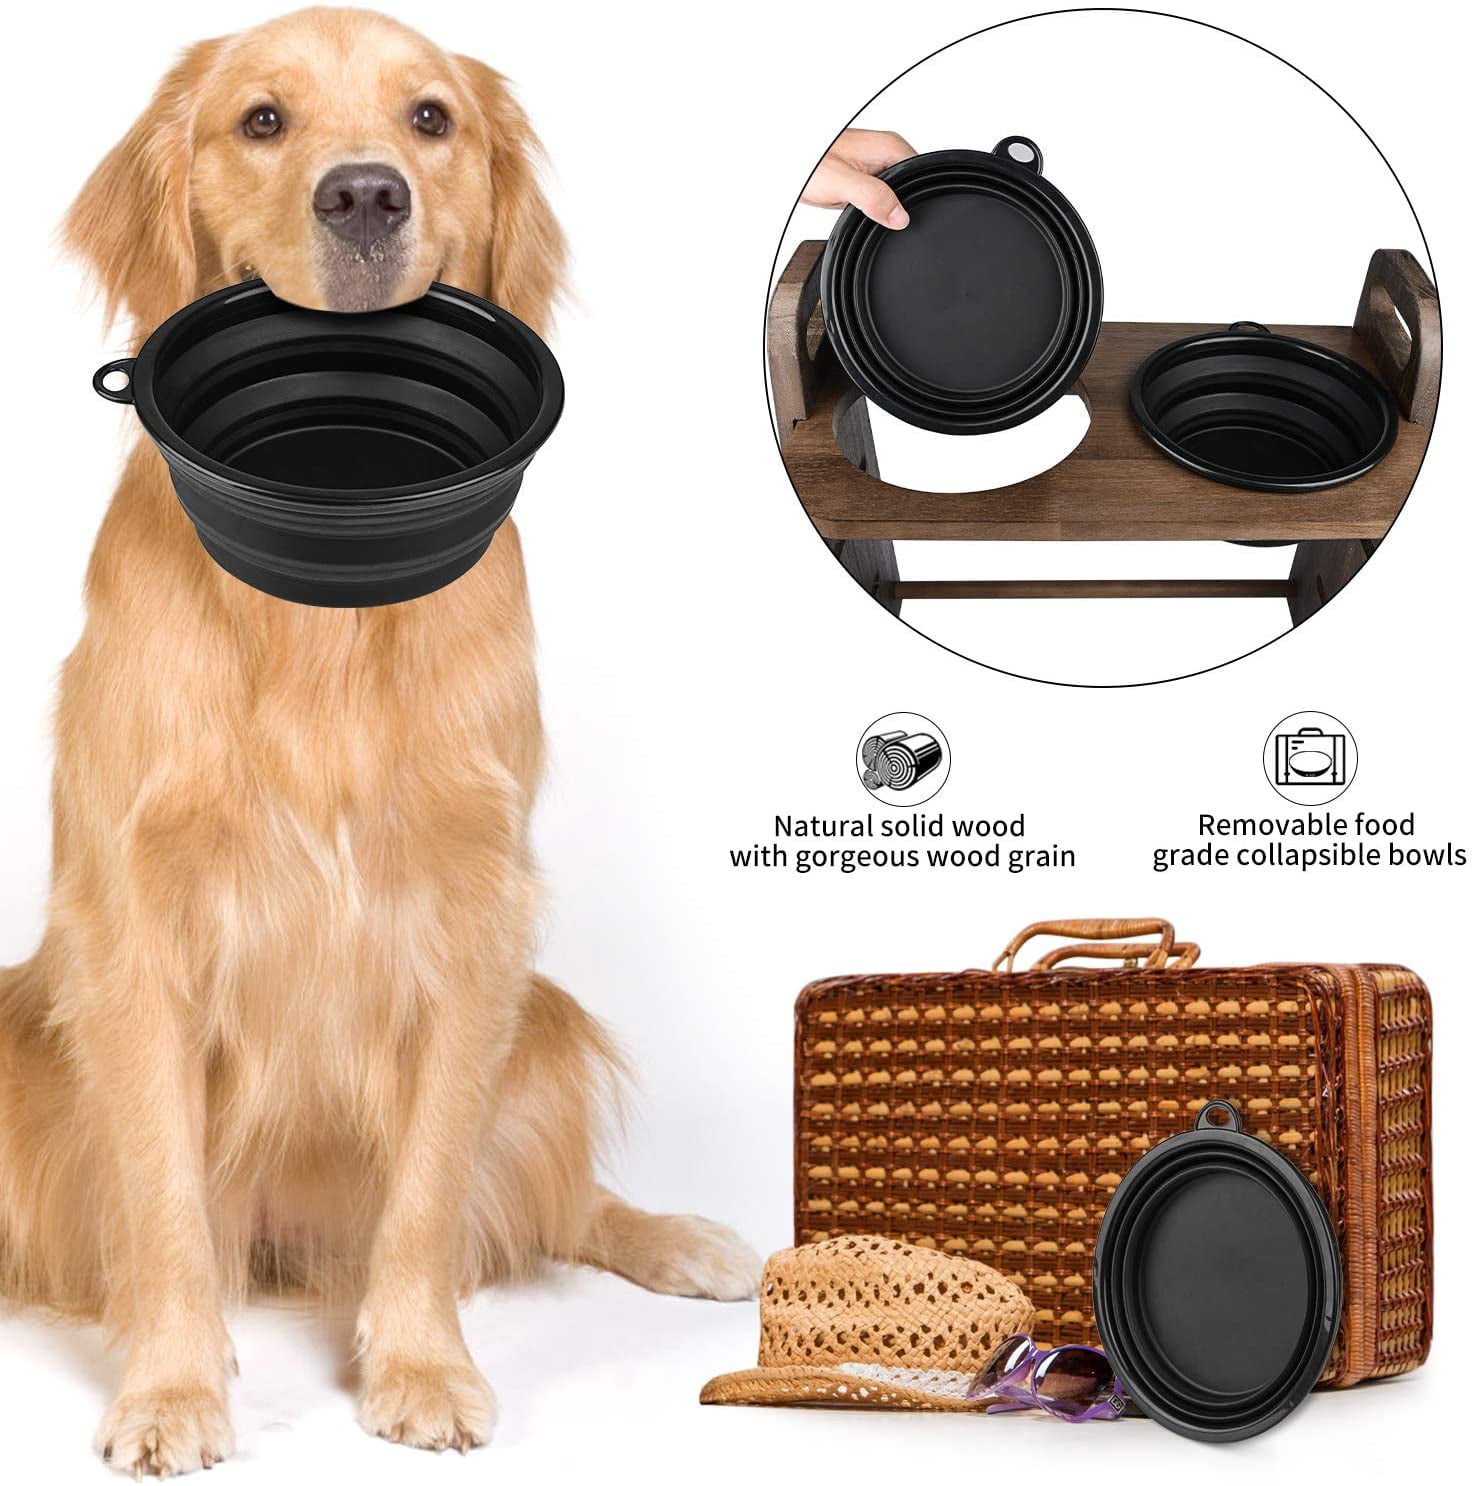 FOYO Elevated Dog Bowls, Raised Dog Food and Water Bowls,Wall Mounted Pet  Comfort Feeding Bowls for Small Dogs and Cats